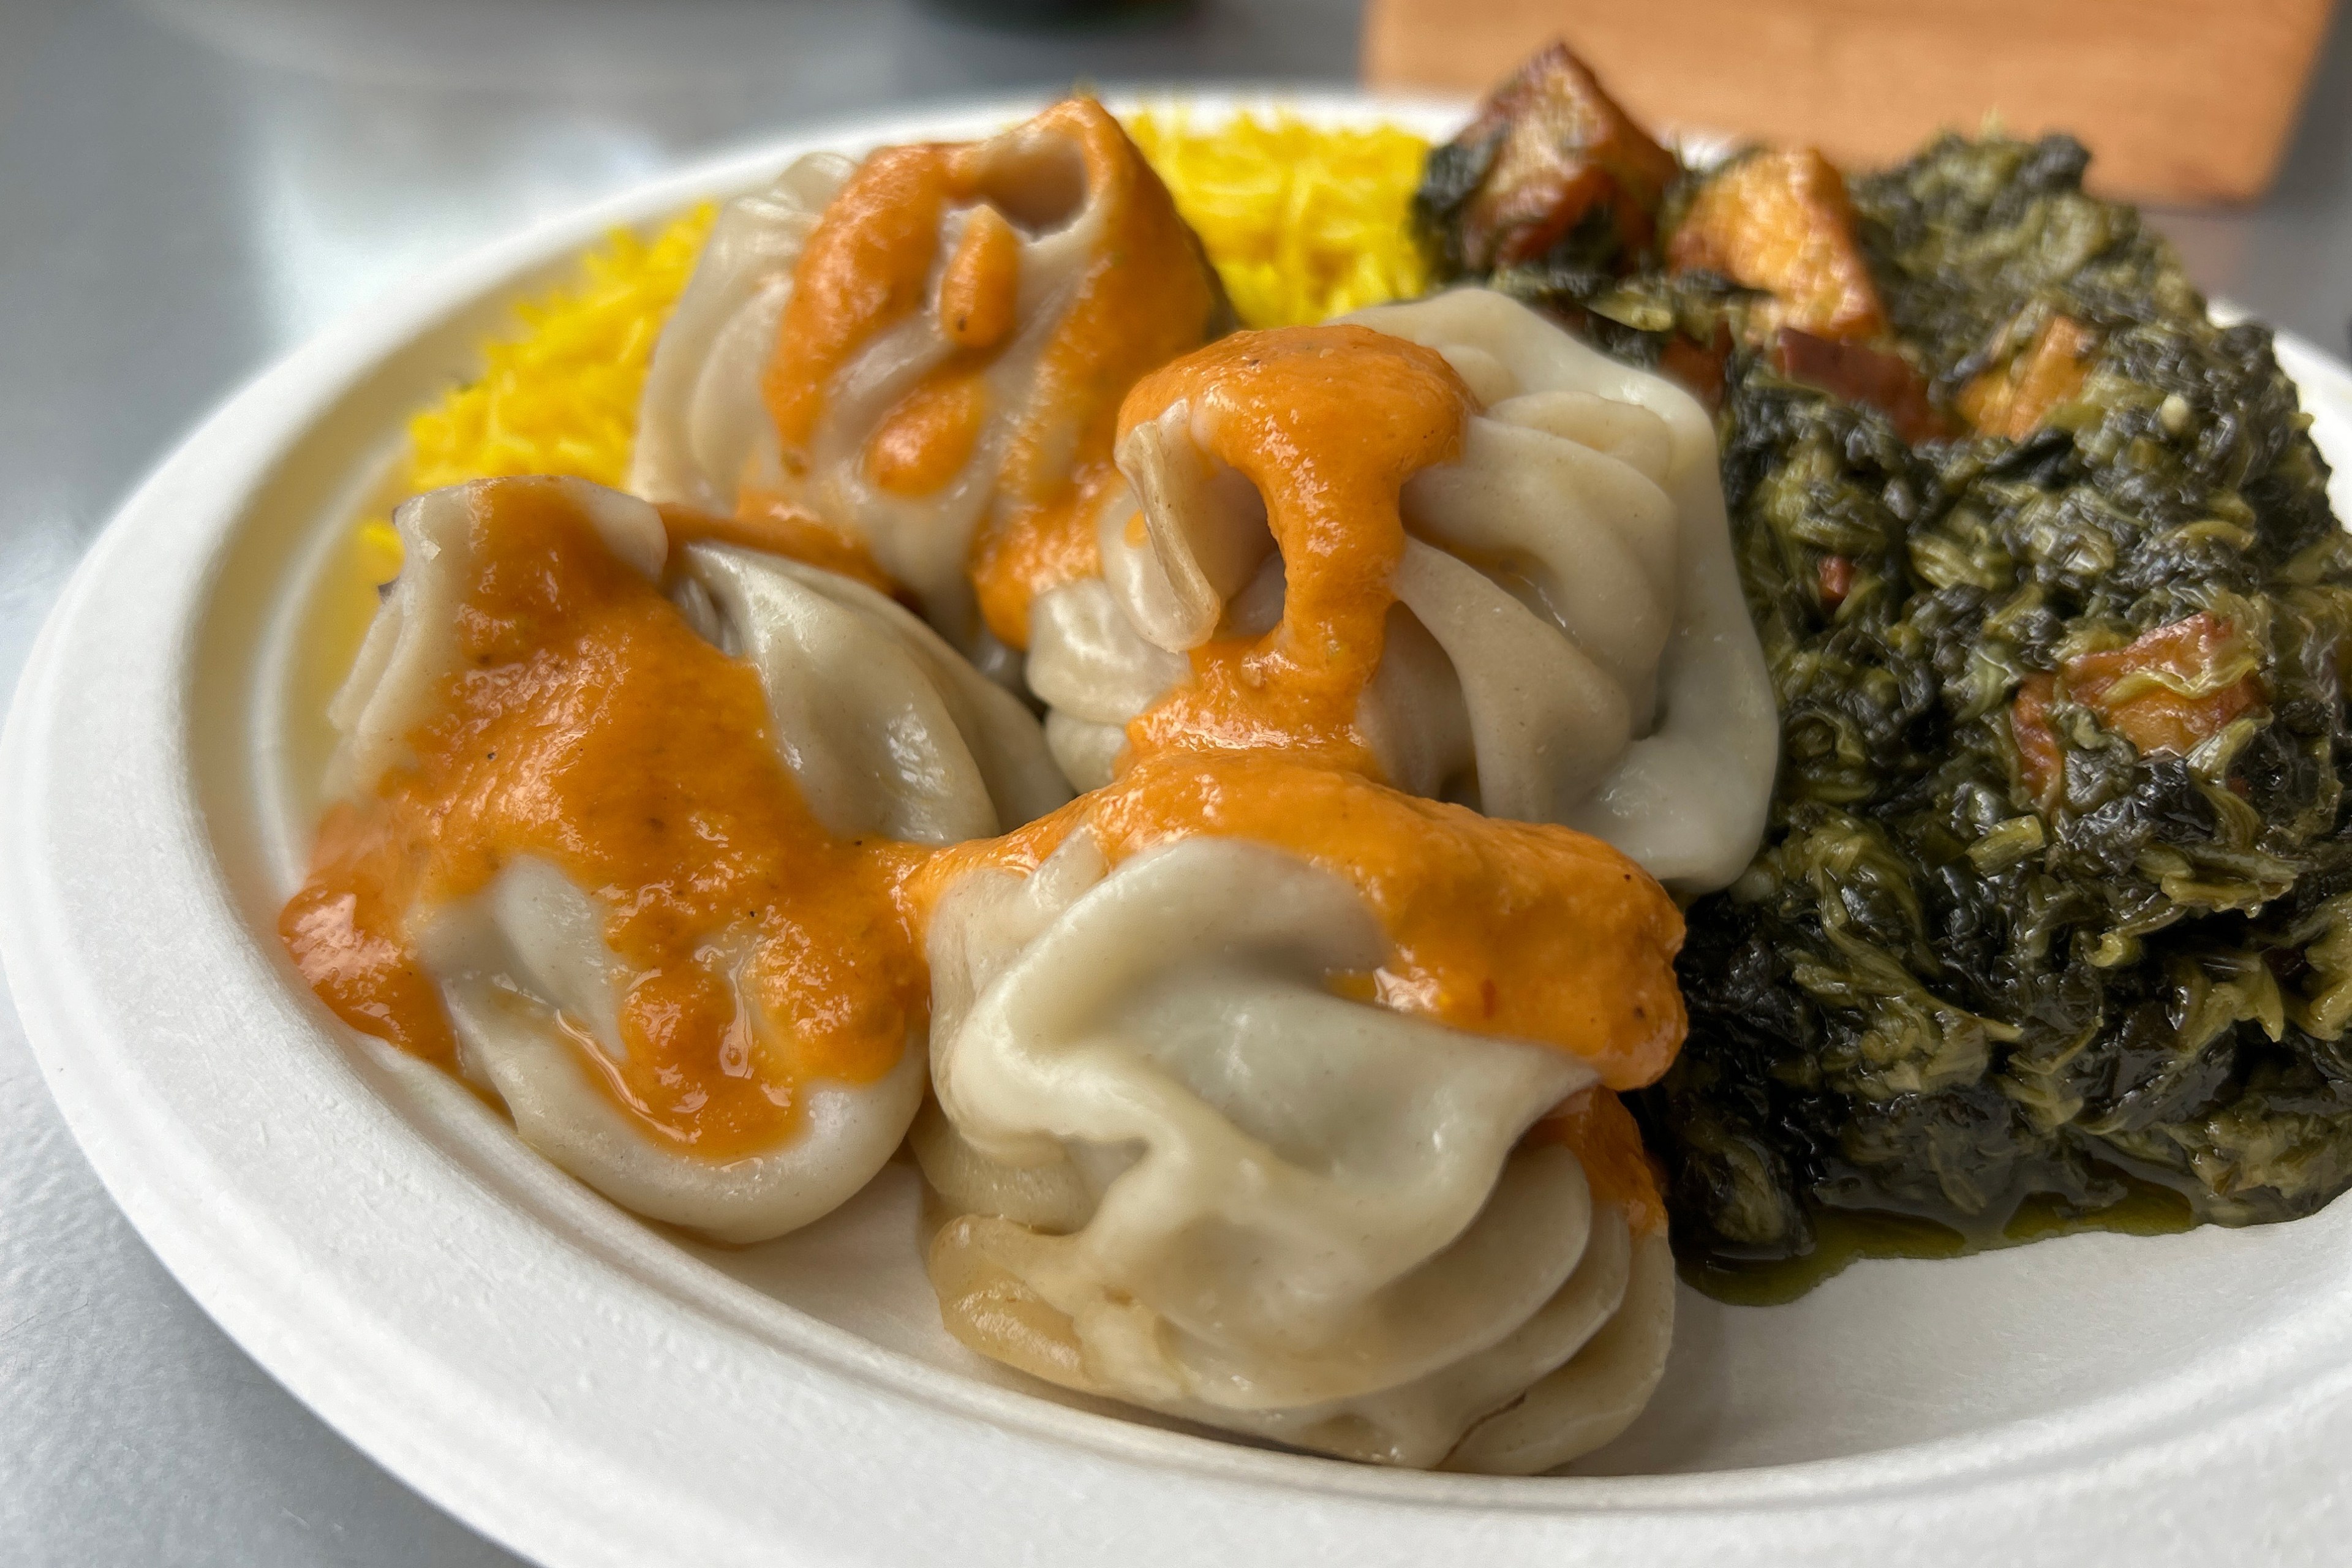 a plate of dumplings with orange sauce drizzled on them